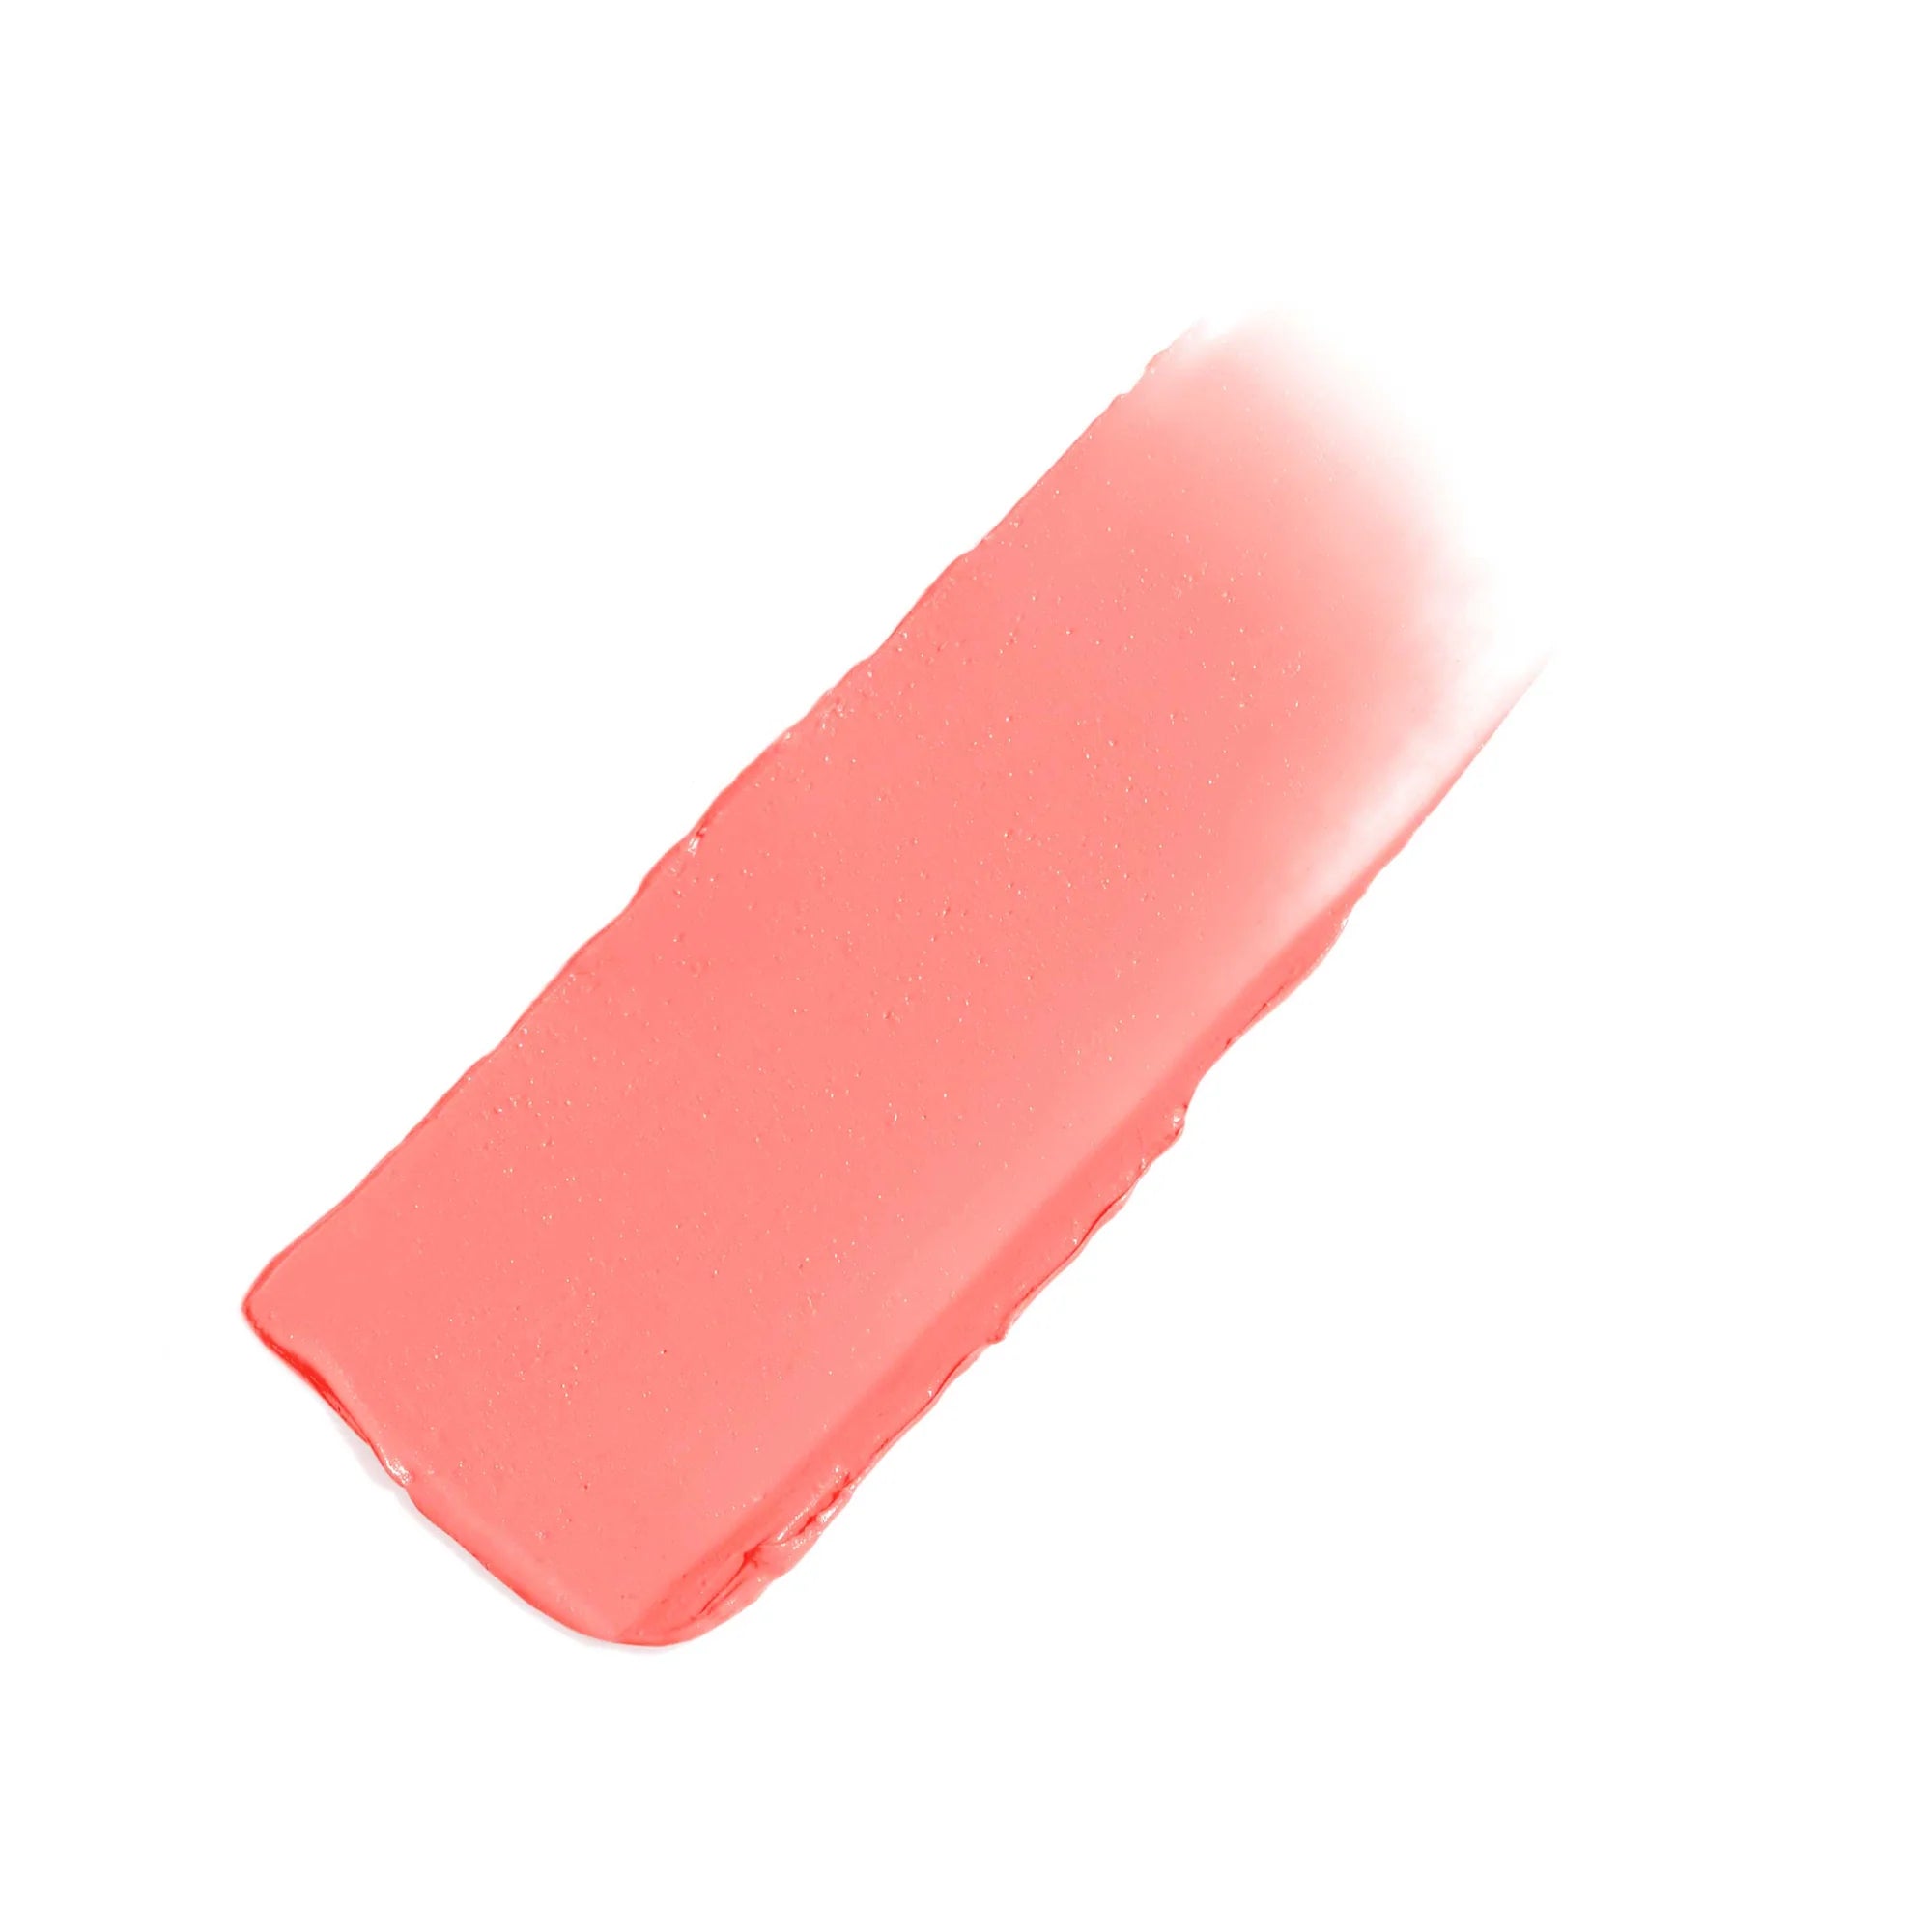 Jane Iredale's Glow Time Blush Stick - shade Fervor - bubble gum pink with no-shimmer